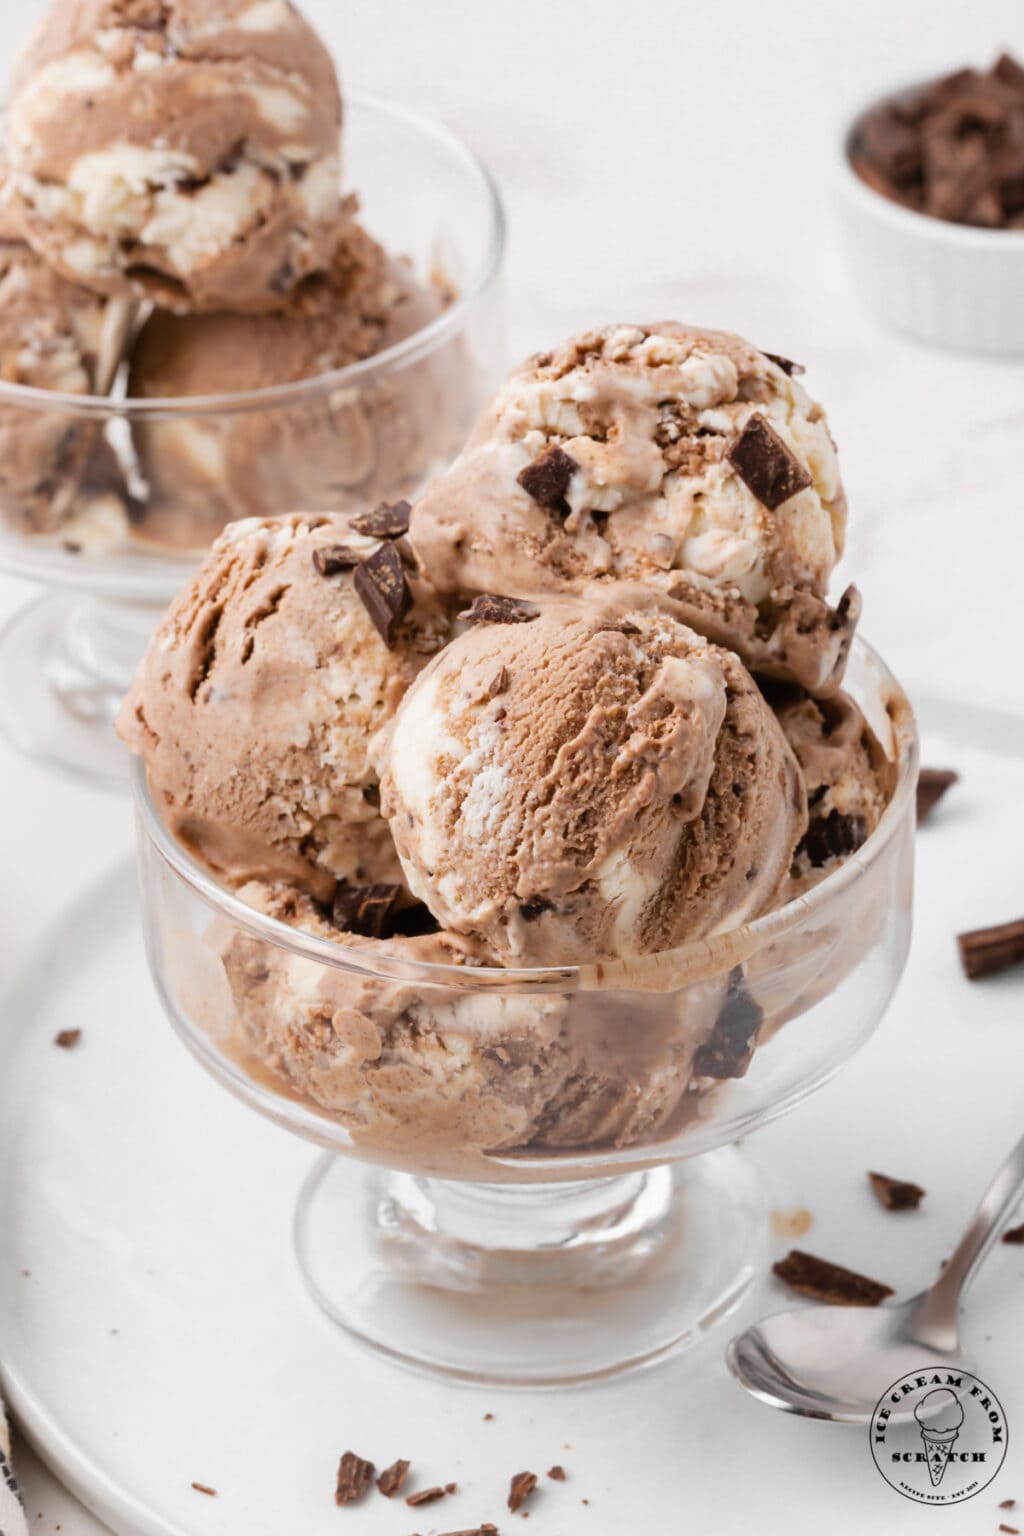 A glass container overflowing with scoops of chocolate frenck silk ice cream.